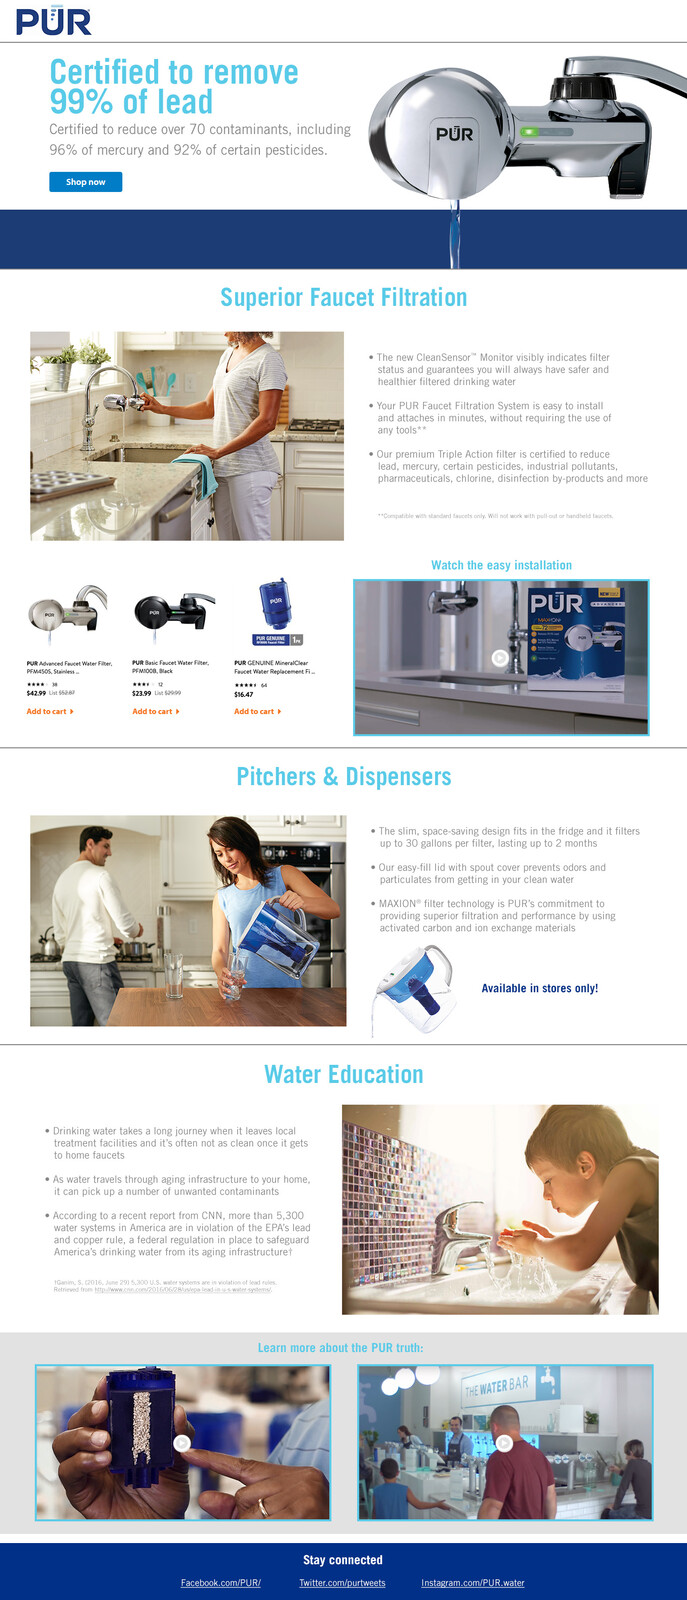 PUR Water Filters Educational Brand Page